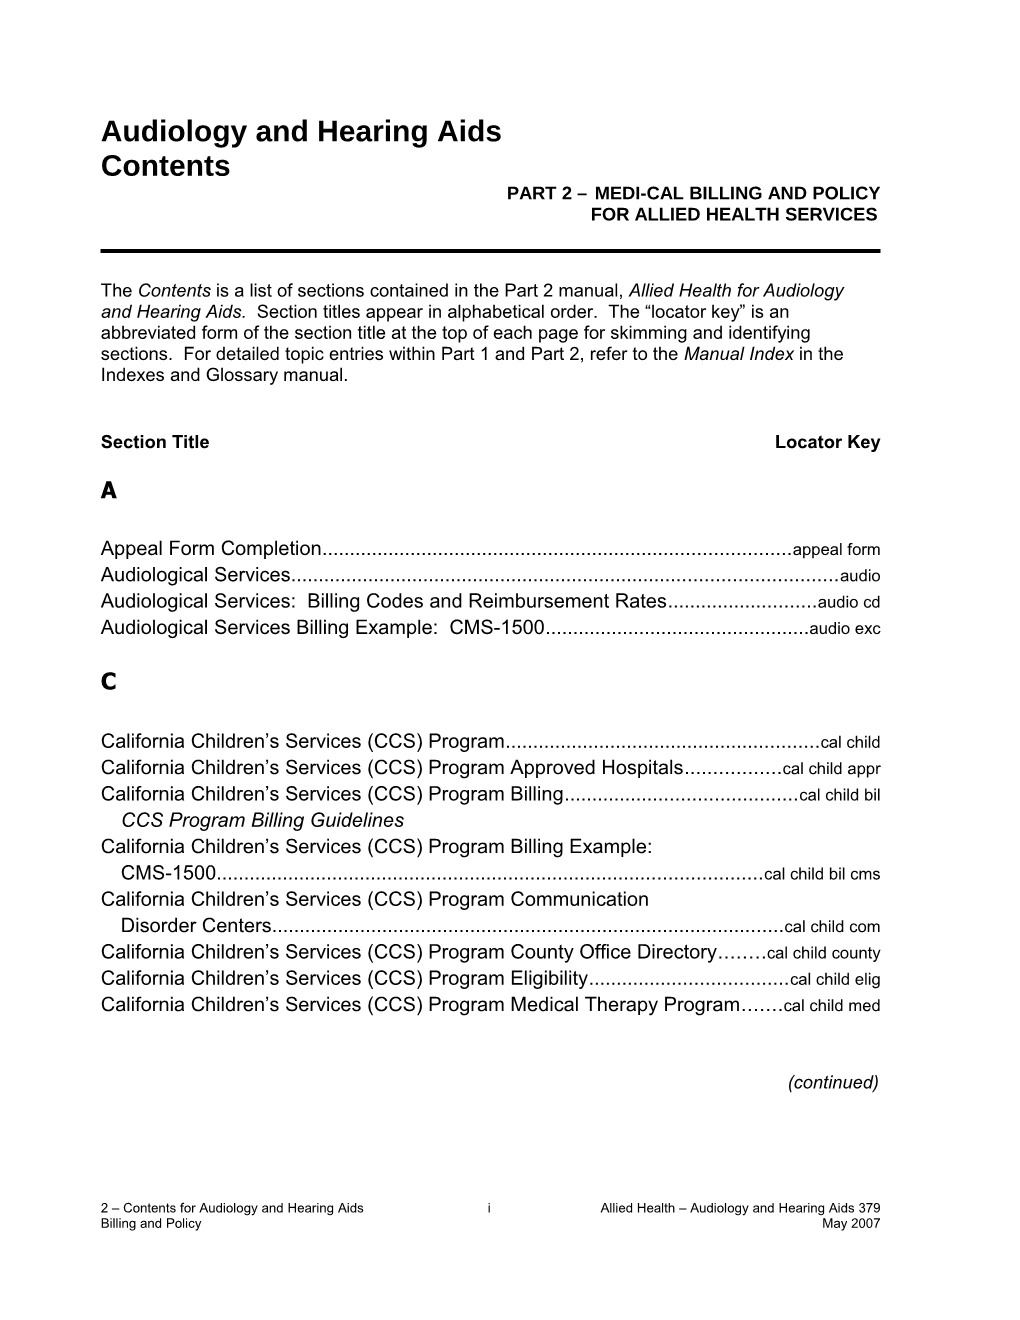 Contents (Part 2 Medi-Cal Billing and Policy): Audiology and Hearing Aids (2Toc Aud)